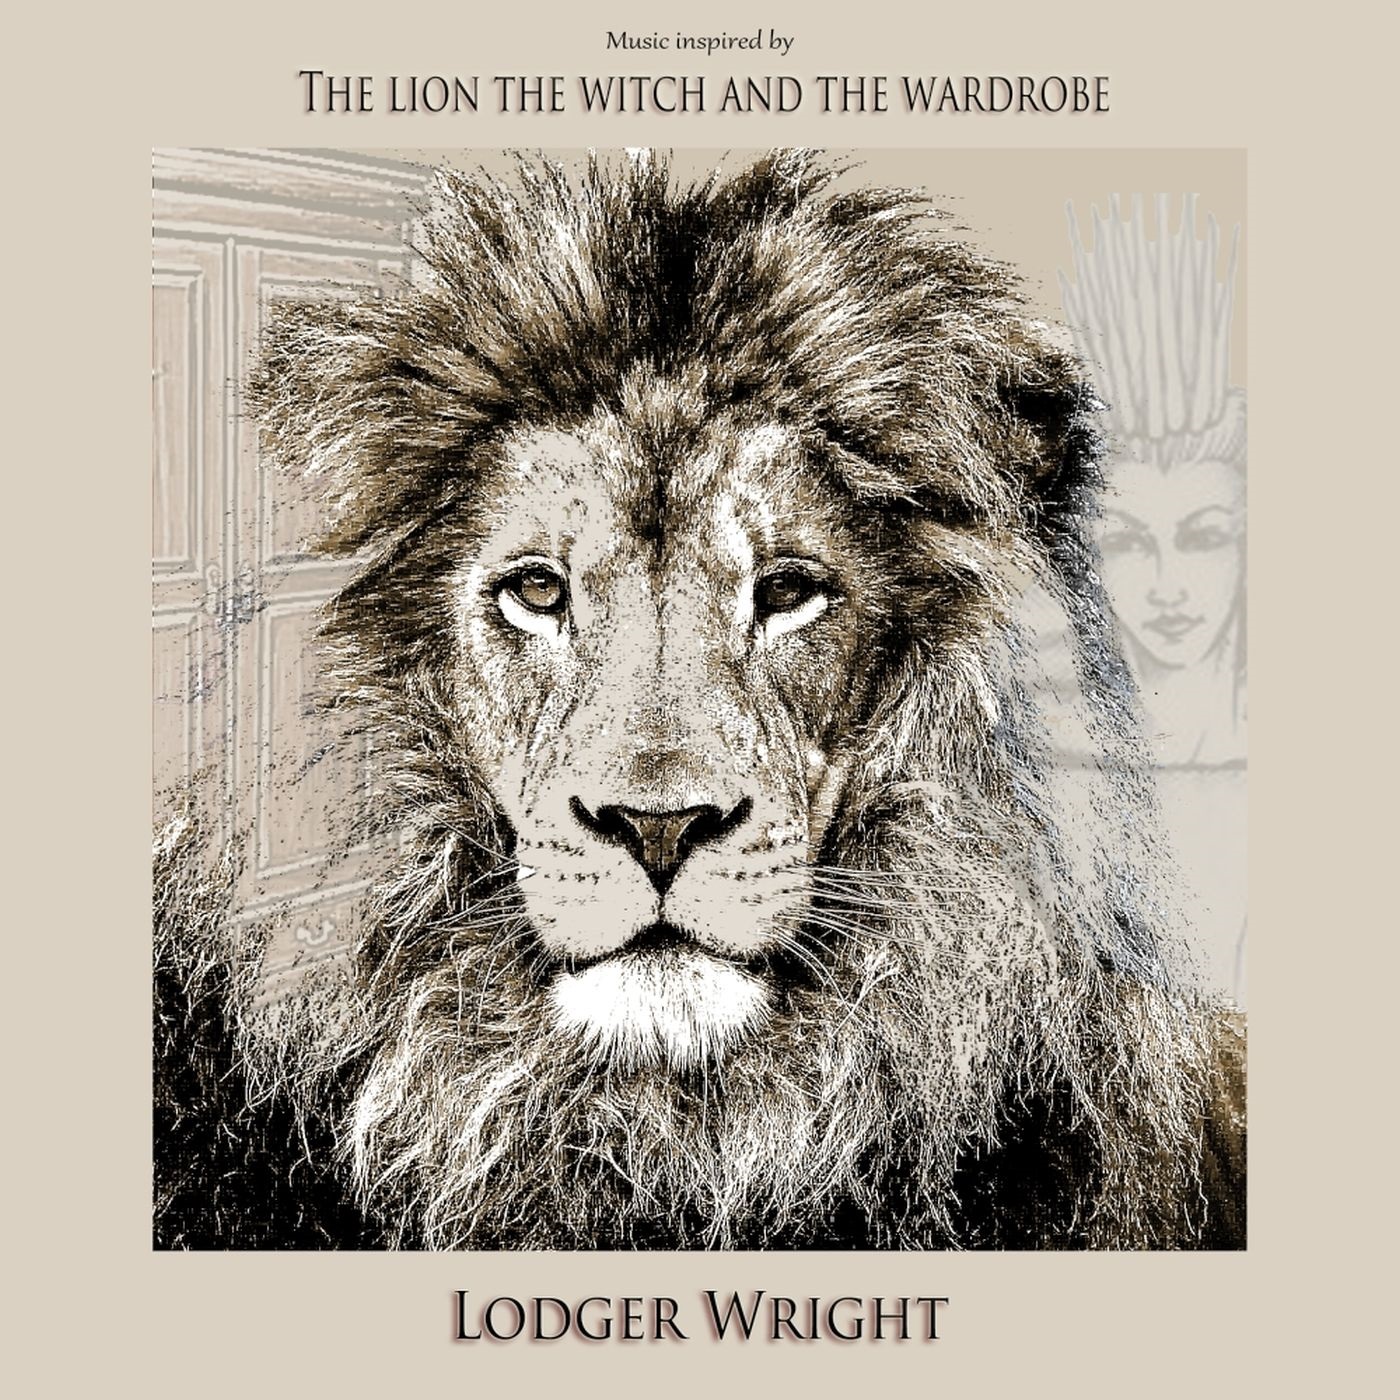 Lodger Wright - Music Inspired by The Lion The Witch and The Wardrobe (2020) [FLAC 24bit/96kHz]